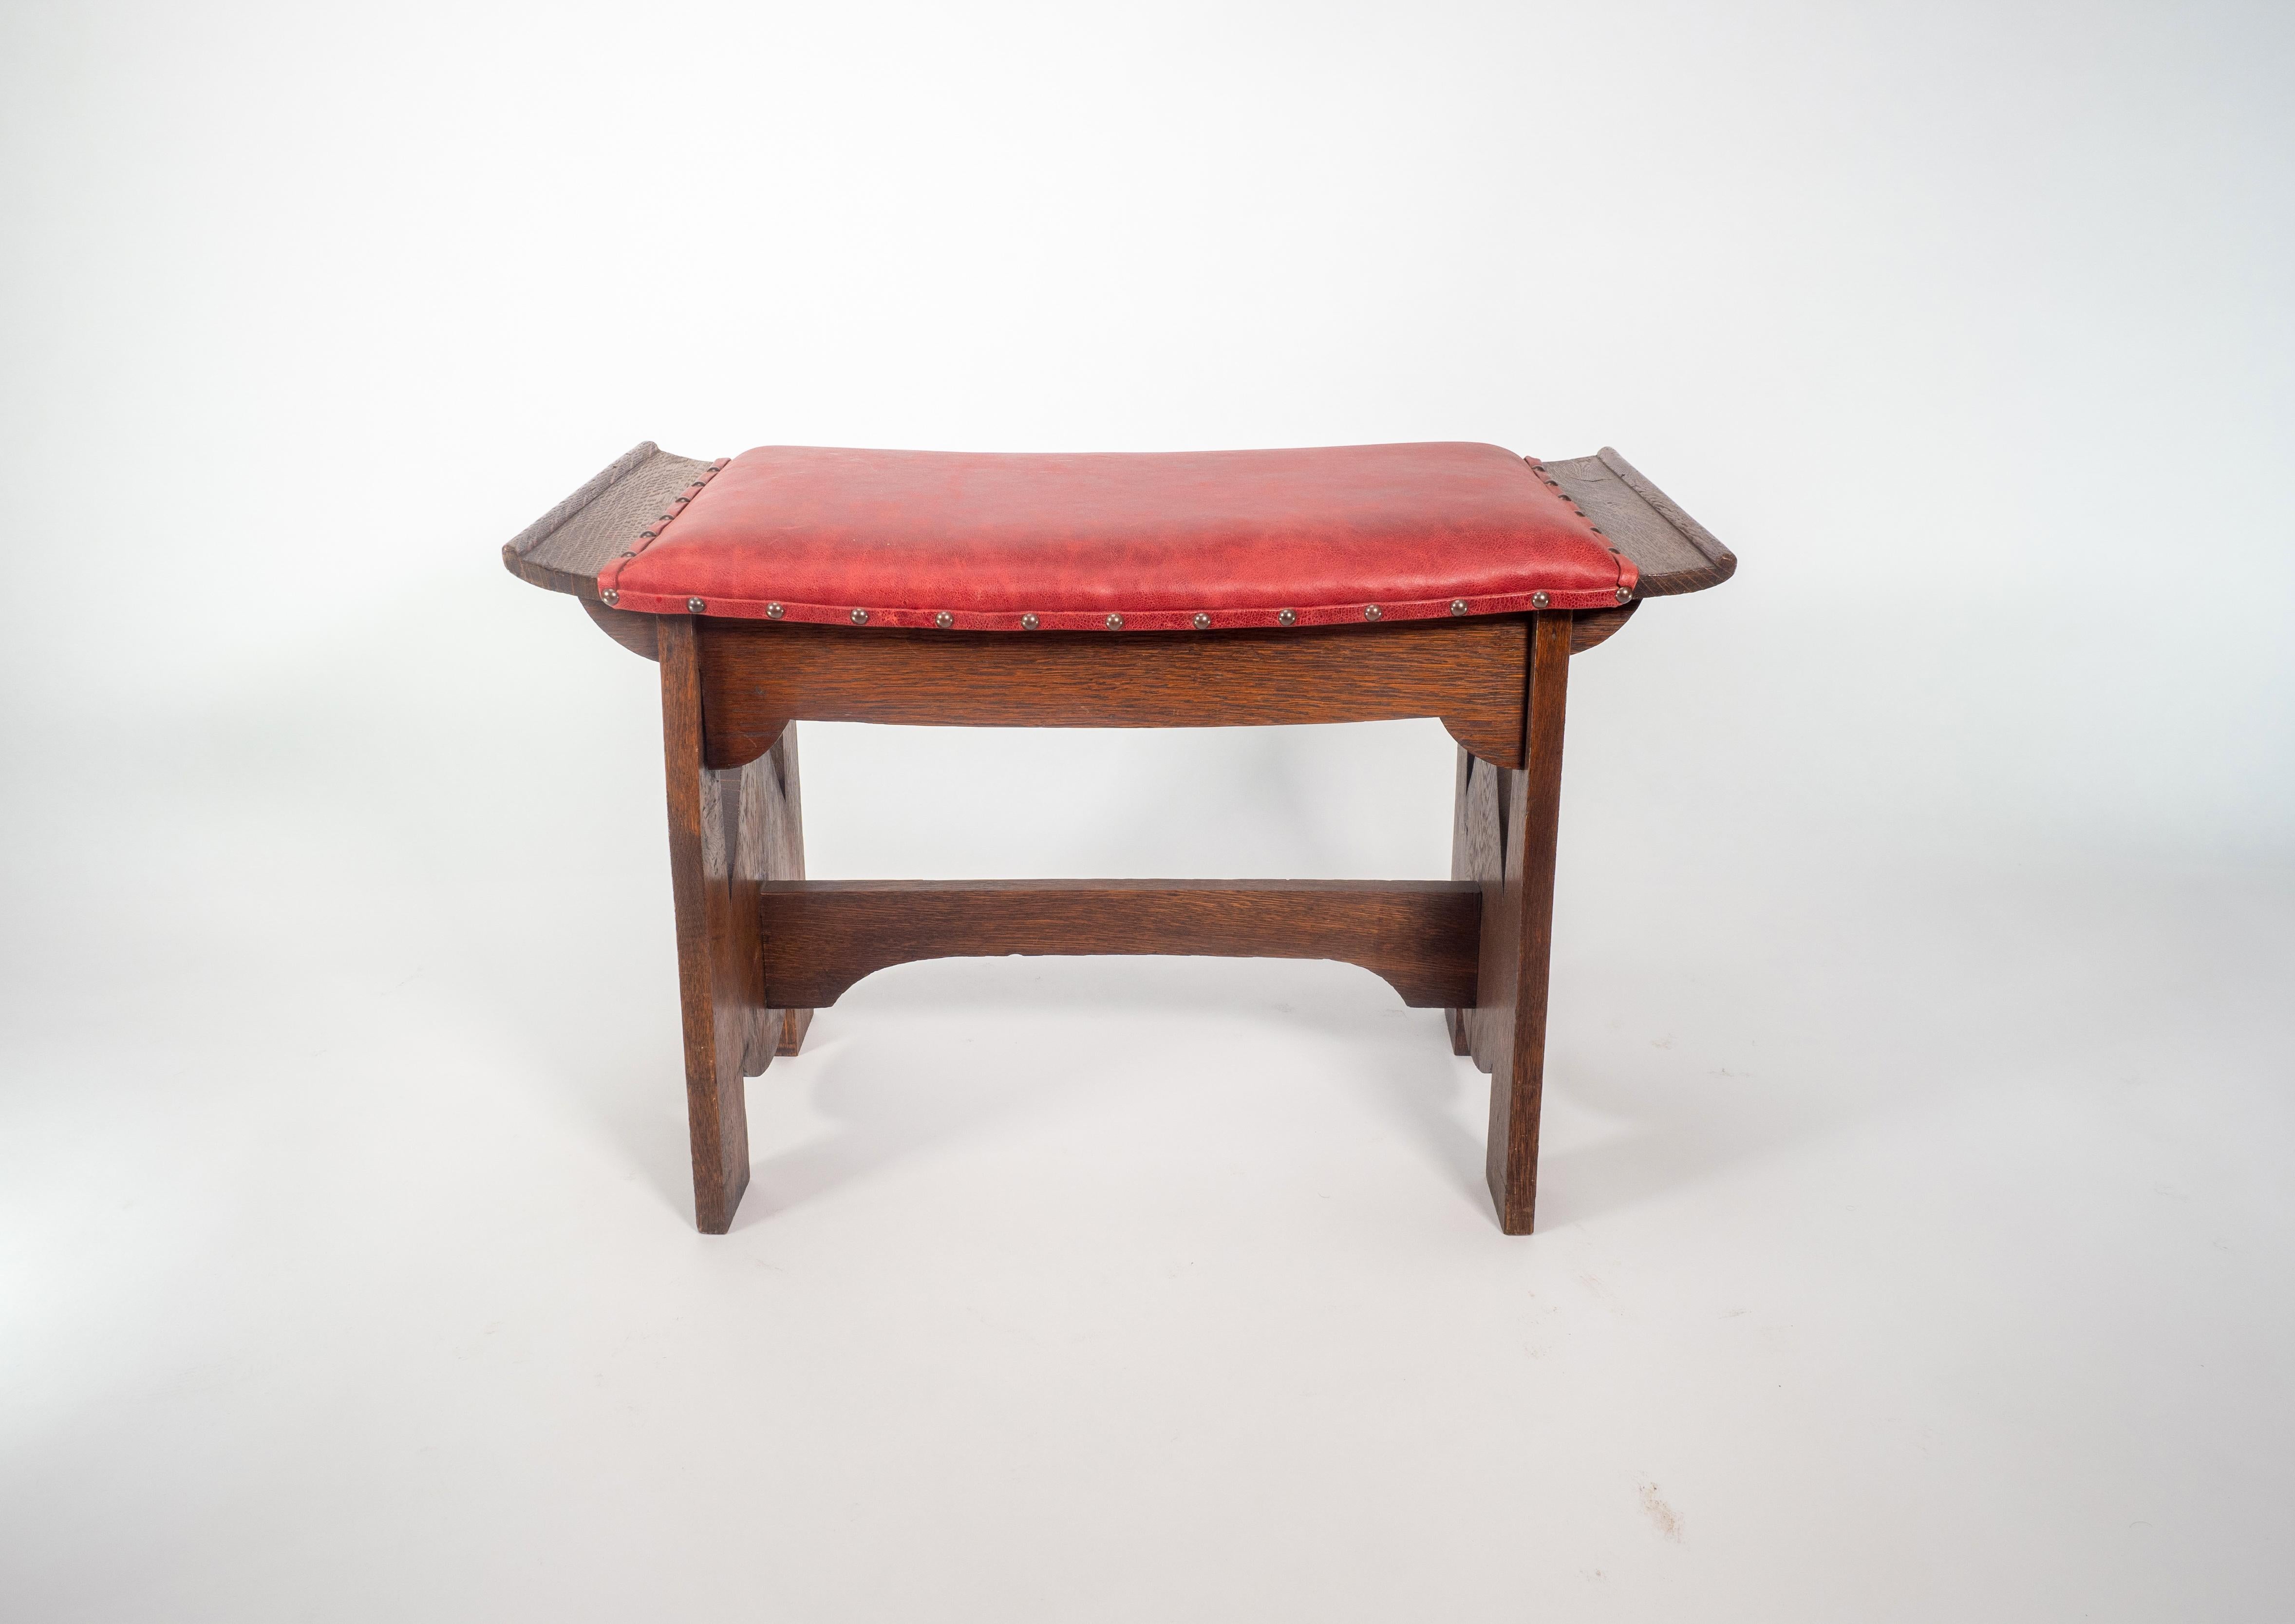 Glasgow School. George Logan attributed. An Arts and Crafts oak stool with upturned sides with quarter circle supports below and teardrop cut-outs to the sides, united by a shaped stretcher. Professionally re-upholstered in a red leather.